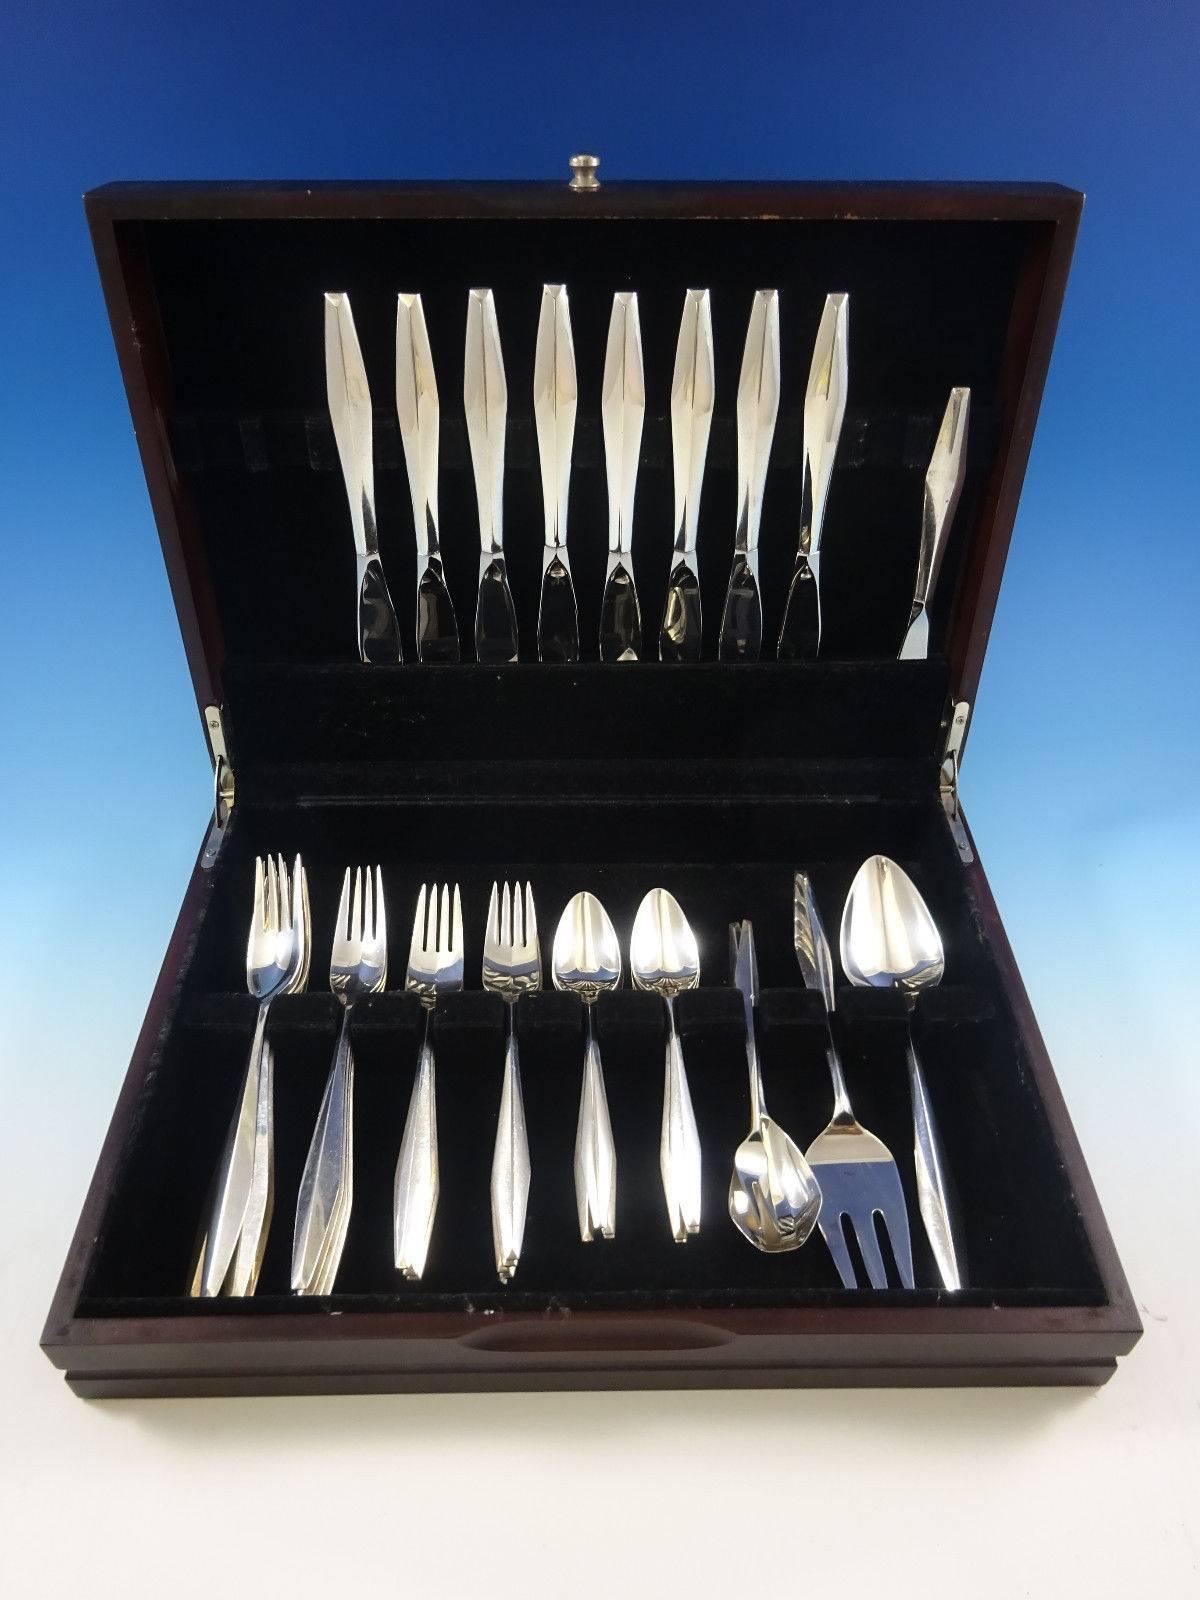 Diamond by Reed and Barton sterling silver flatware set - 36 pieces. This set includes: Eight knives, 8 7/8